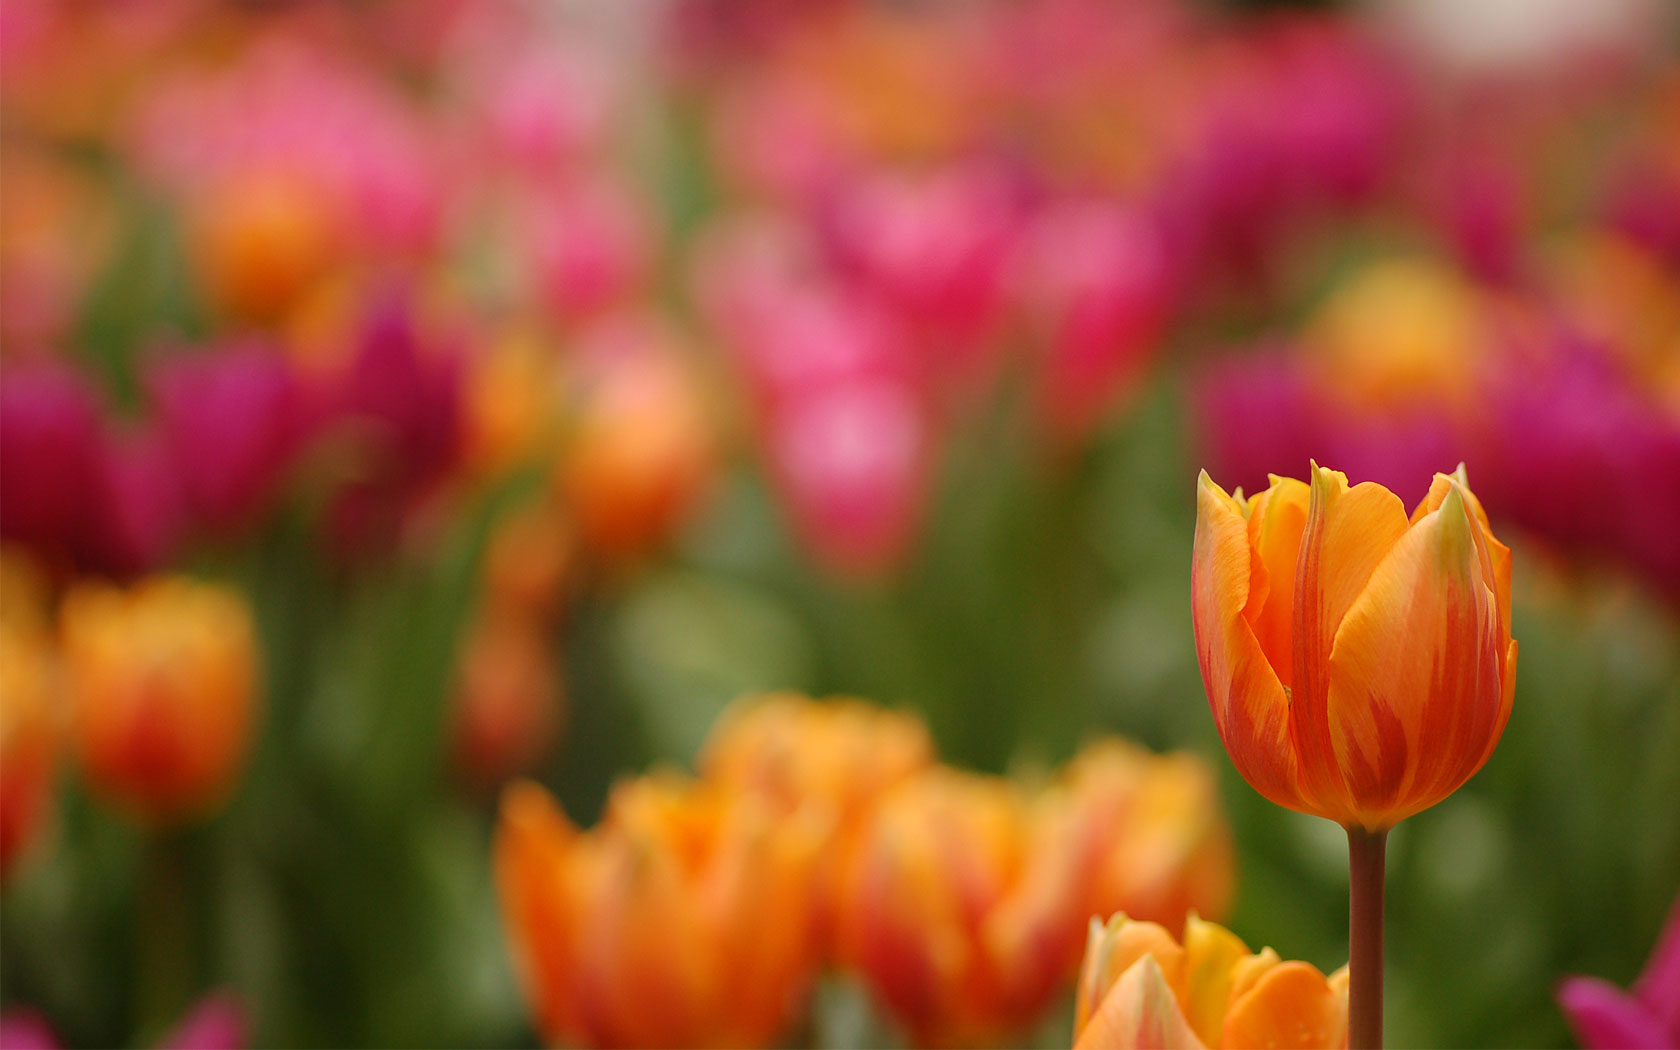 HD Tulip Wallpapers Full HD Pictures